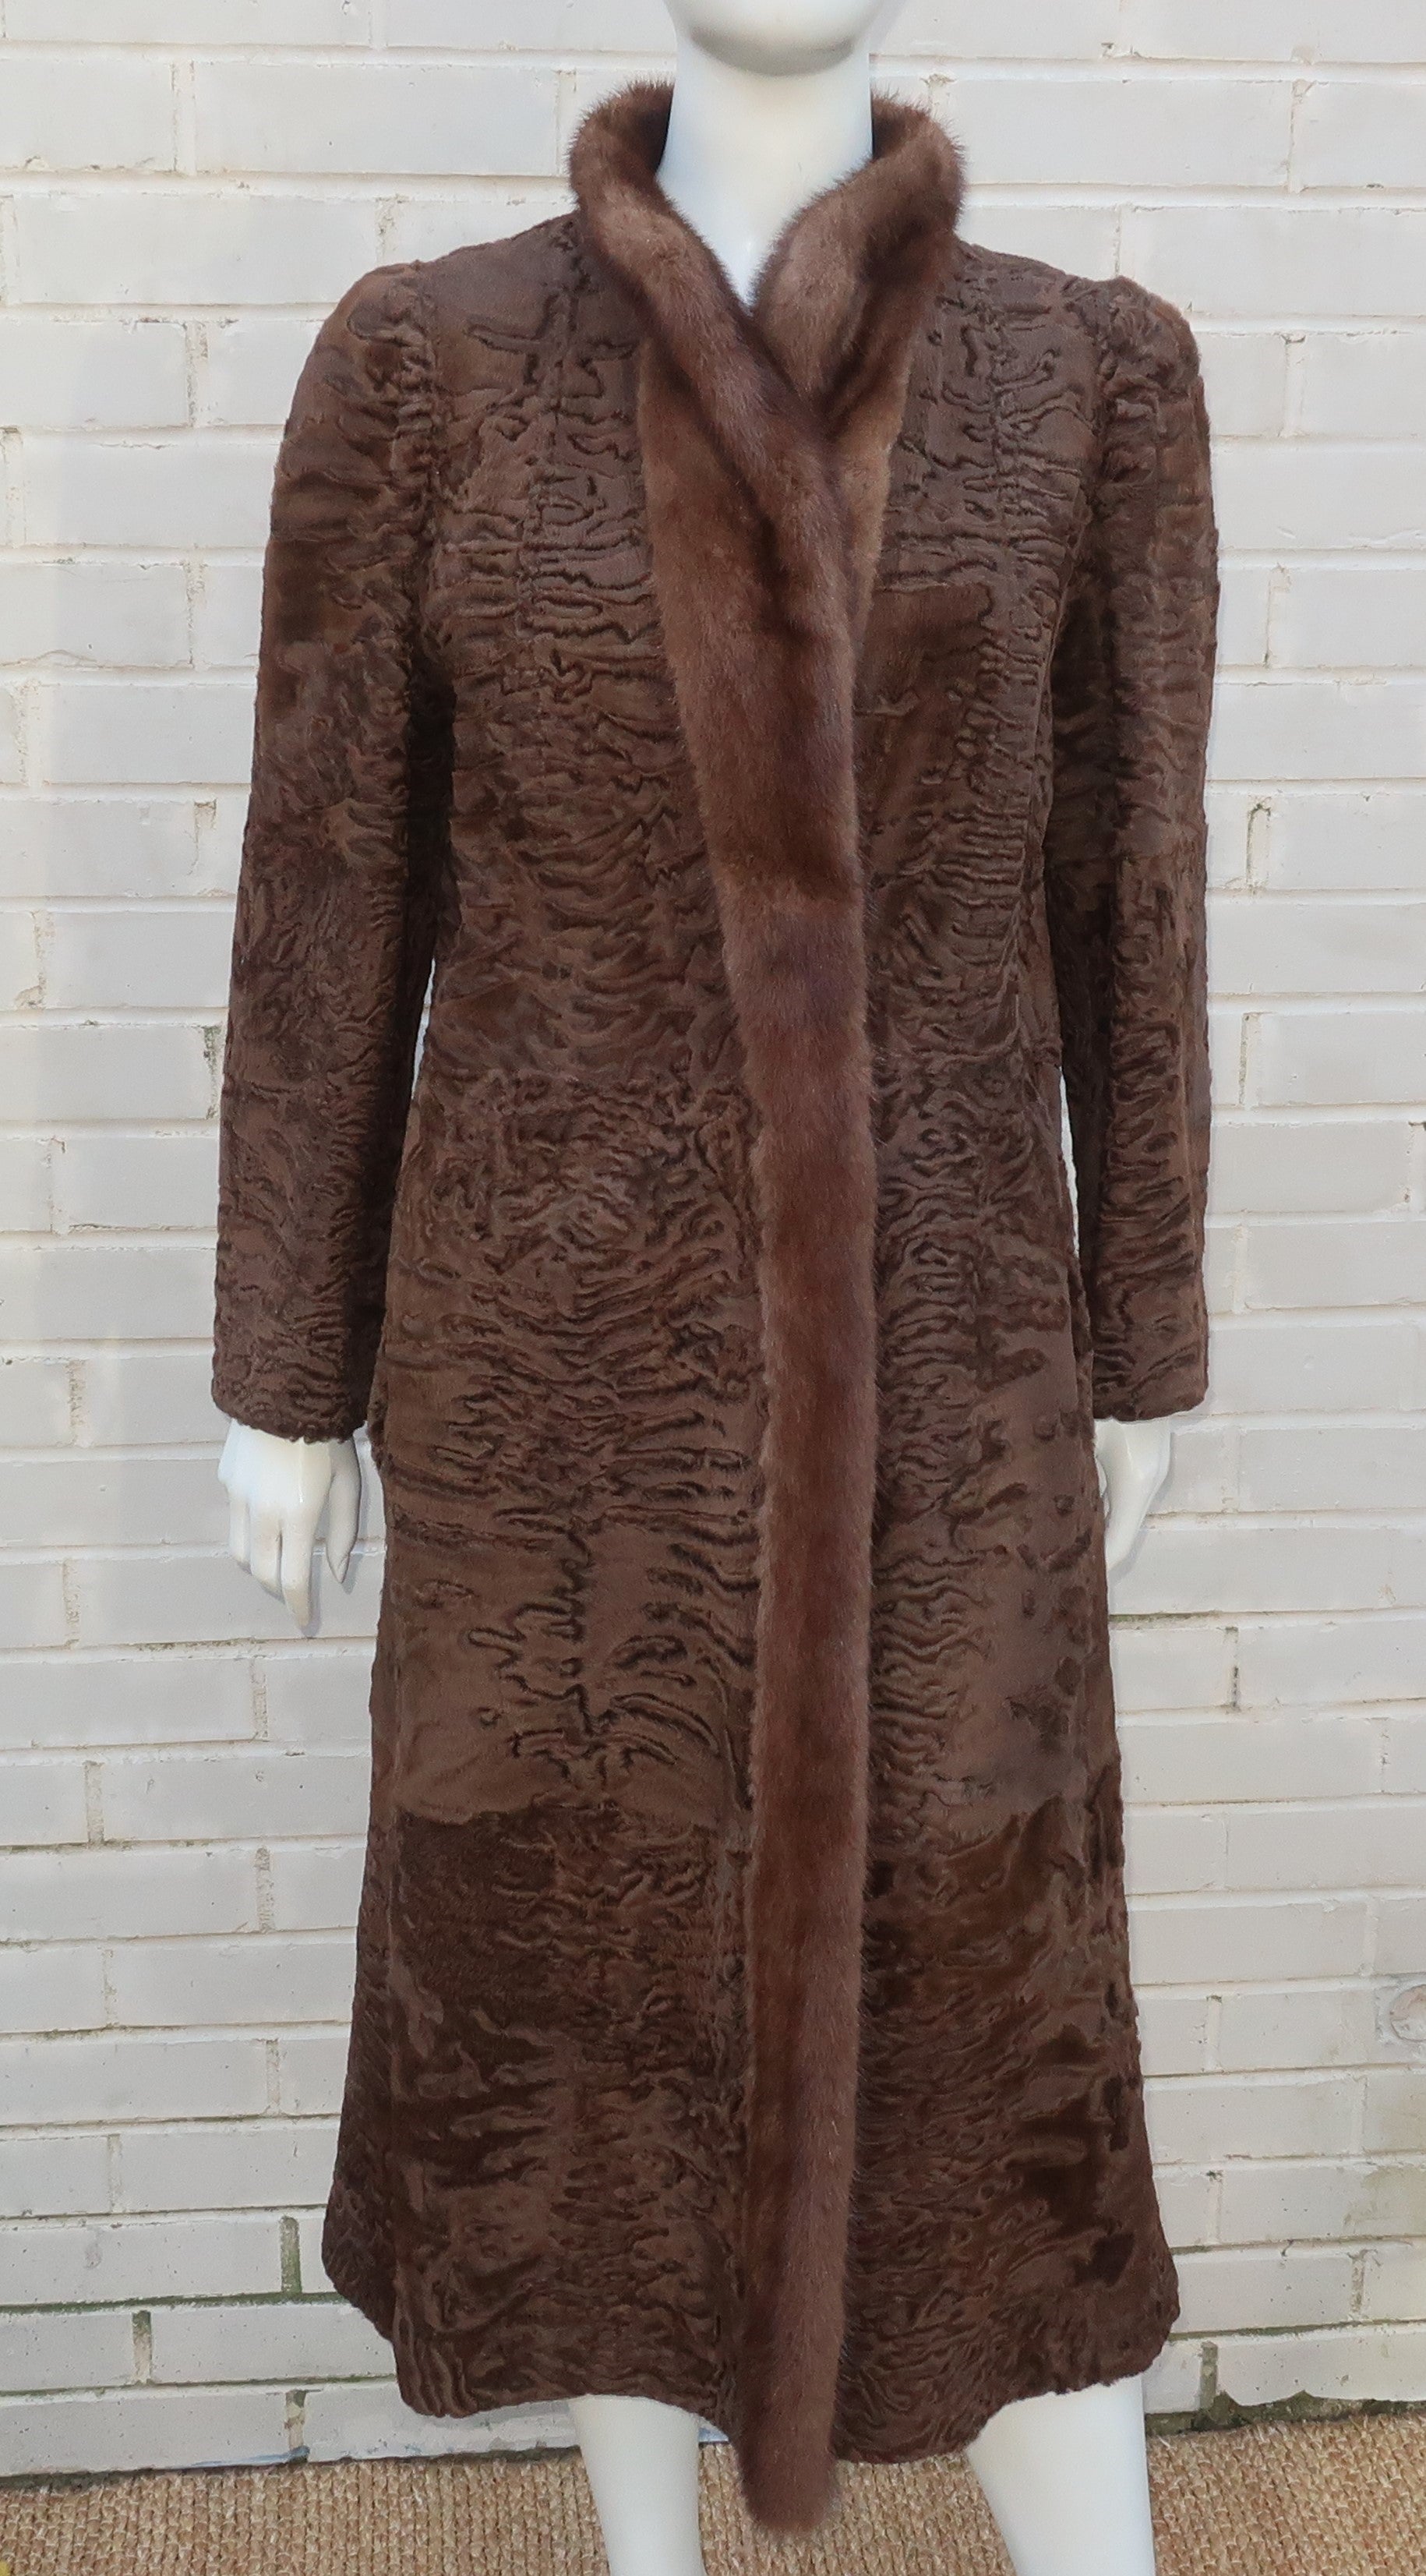 A strikingly handsome brown broadtail fur coat with mink trim which reverses to a more casual leather coat with a camel color suede grid.  The stylish 1970's design is by famed New York furrier, Christie Brothers, and has quality details.  The